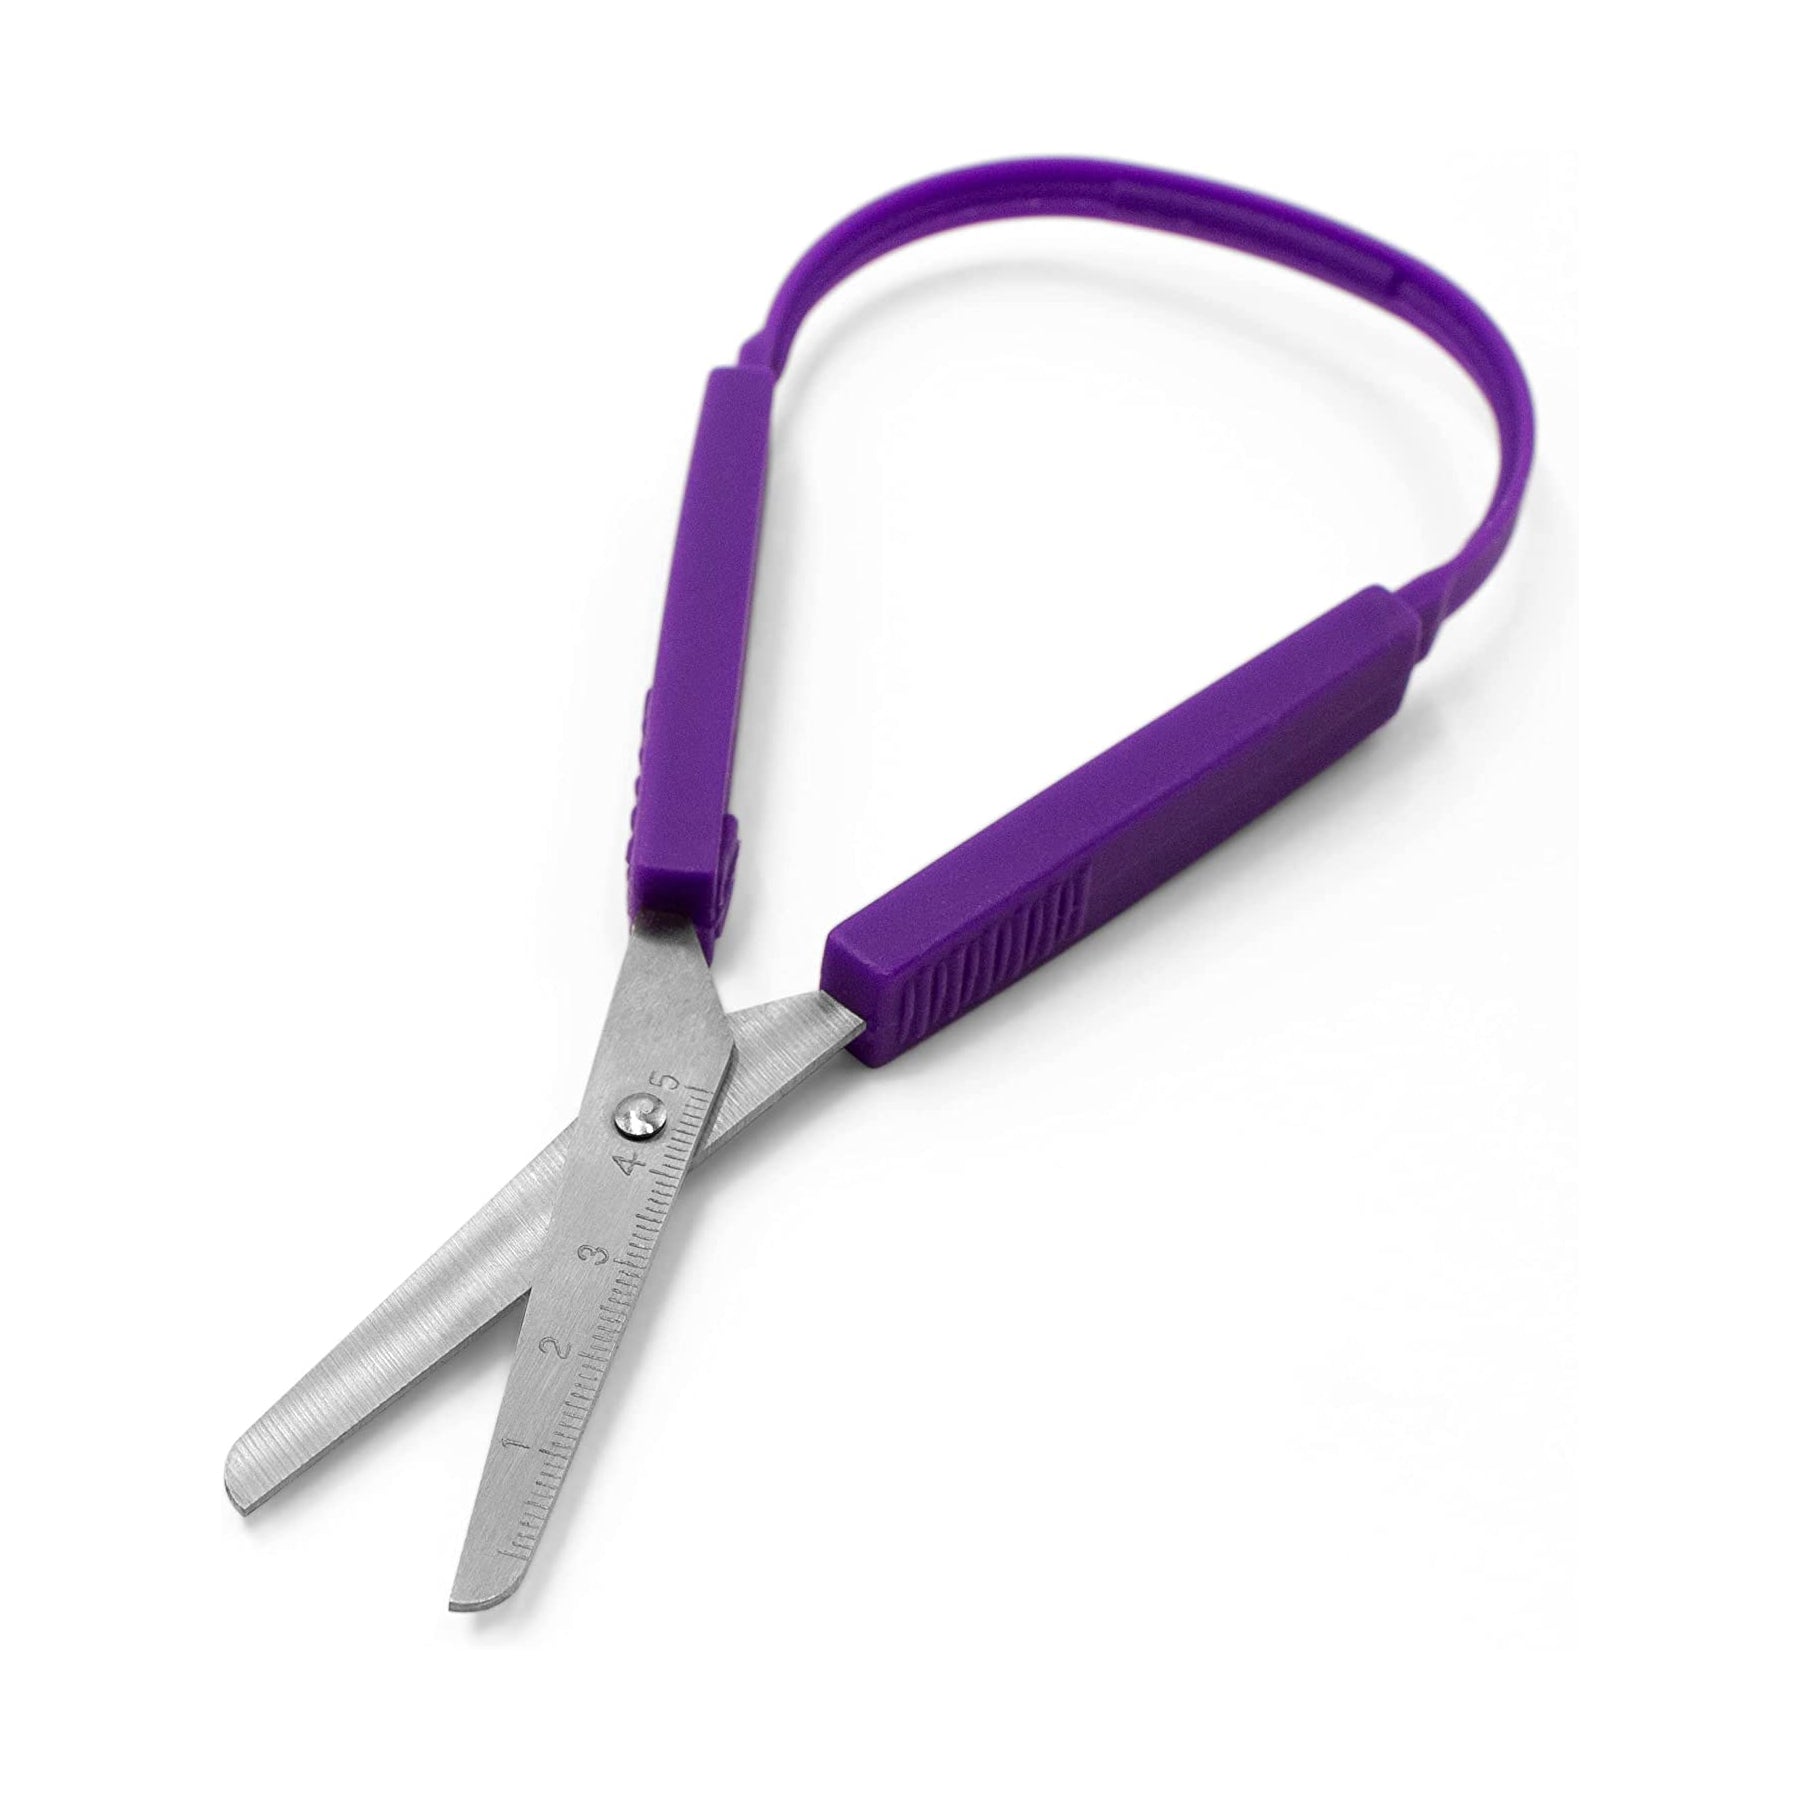 AED HS74216 Hystero-Pro Rotatable Hook Scissors, 5FR x 40cm, S